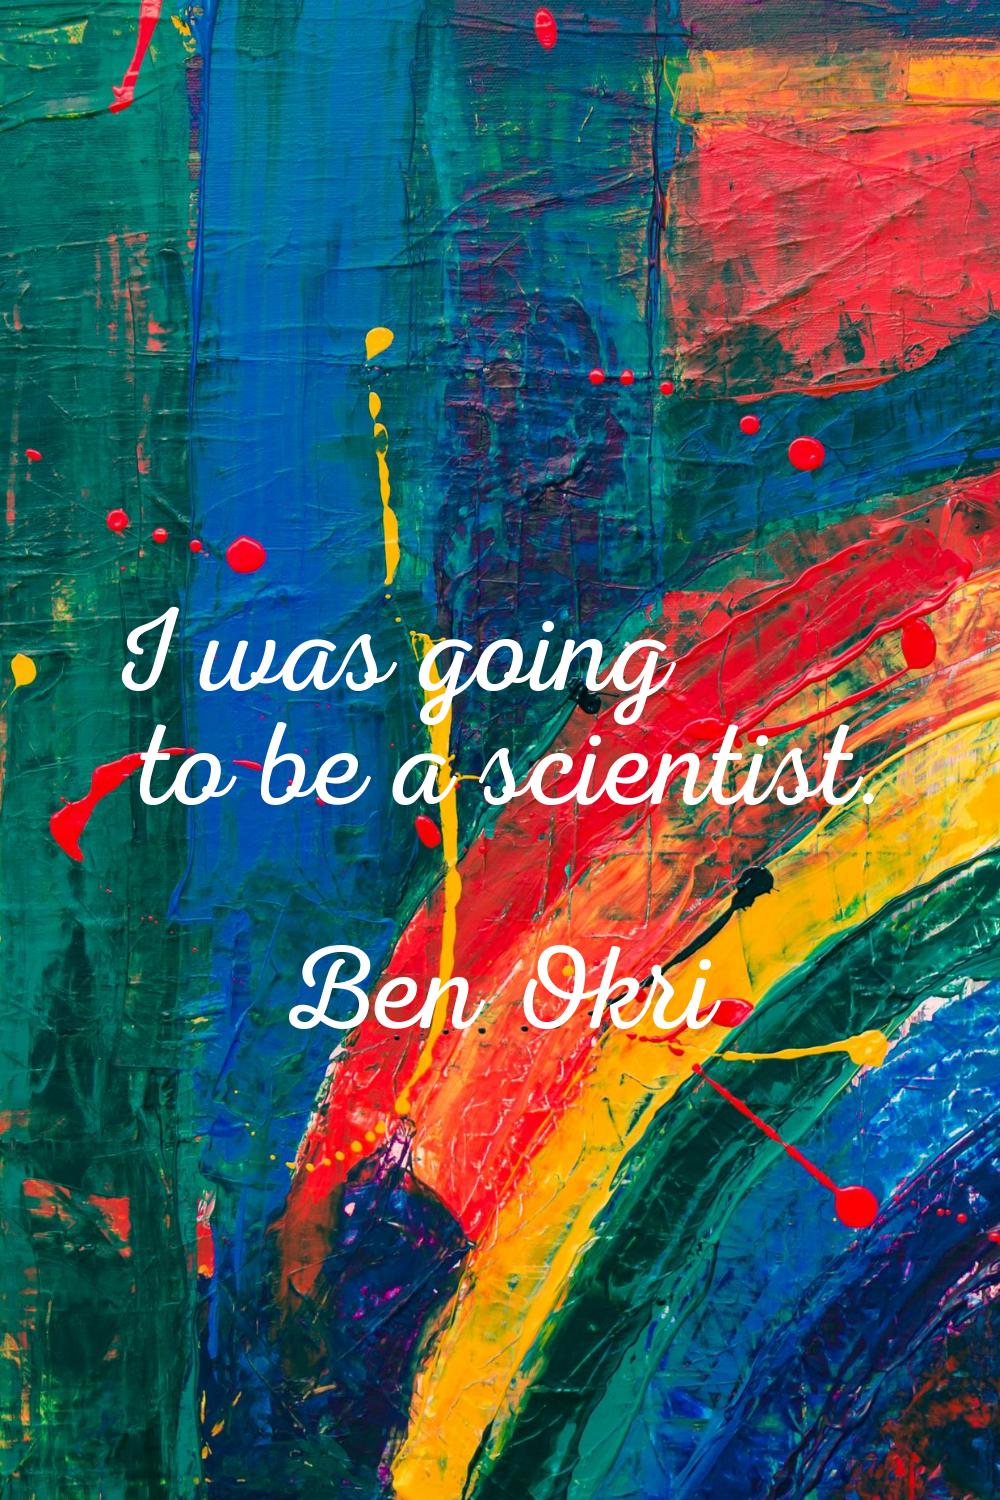 I was going to be a scientist.